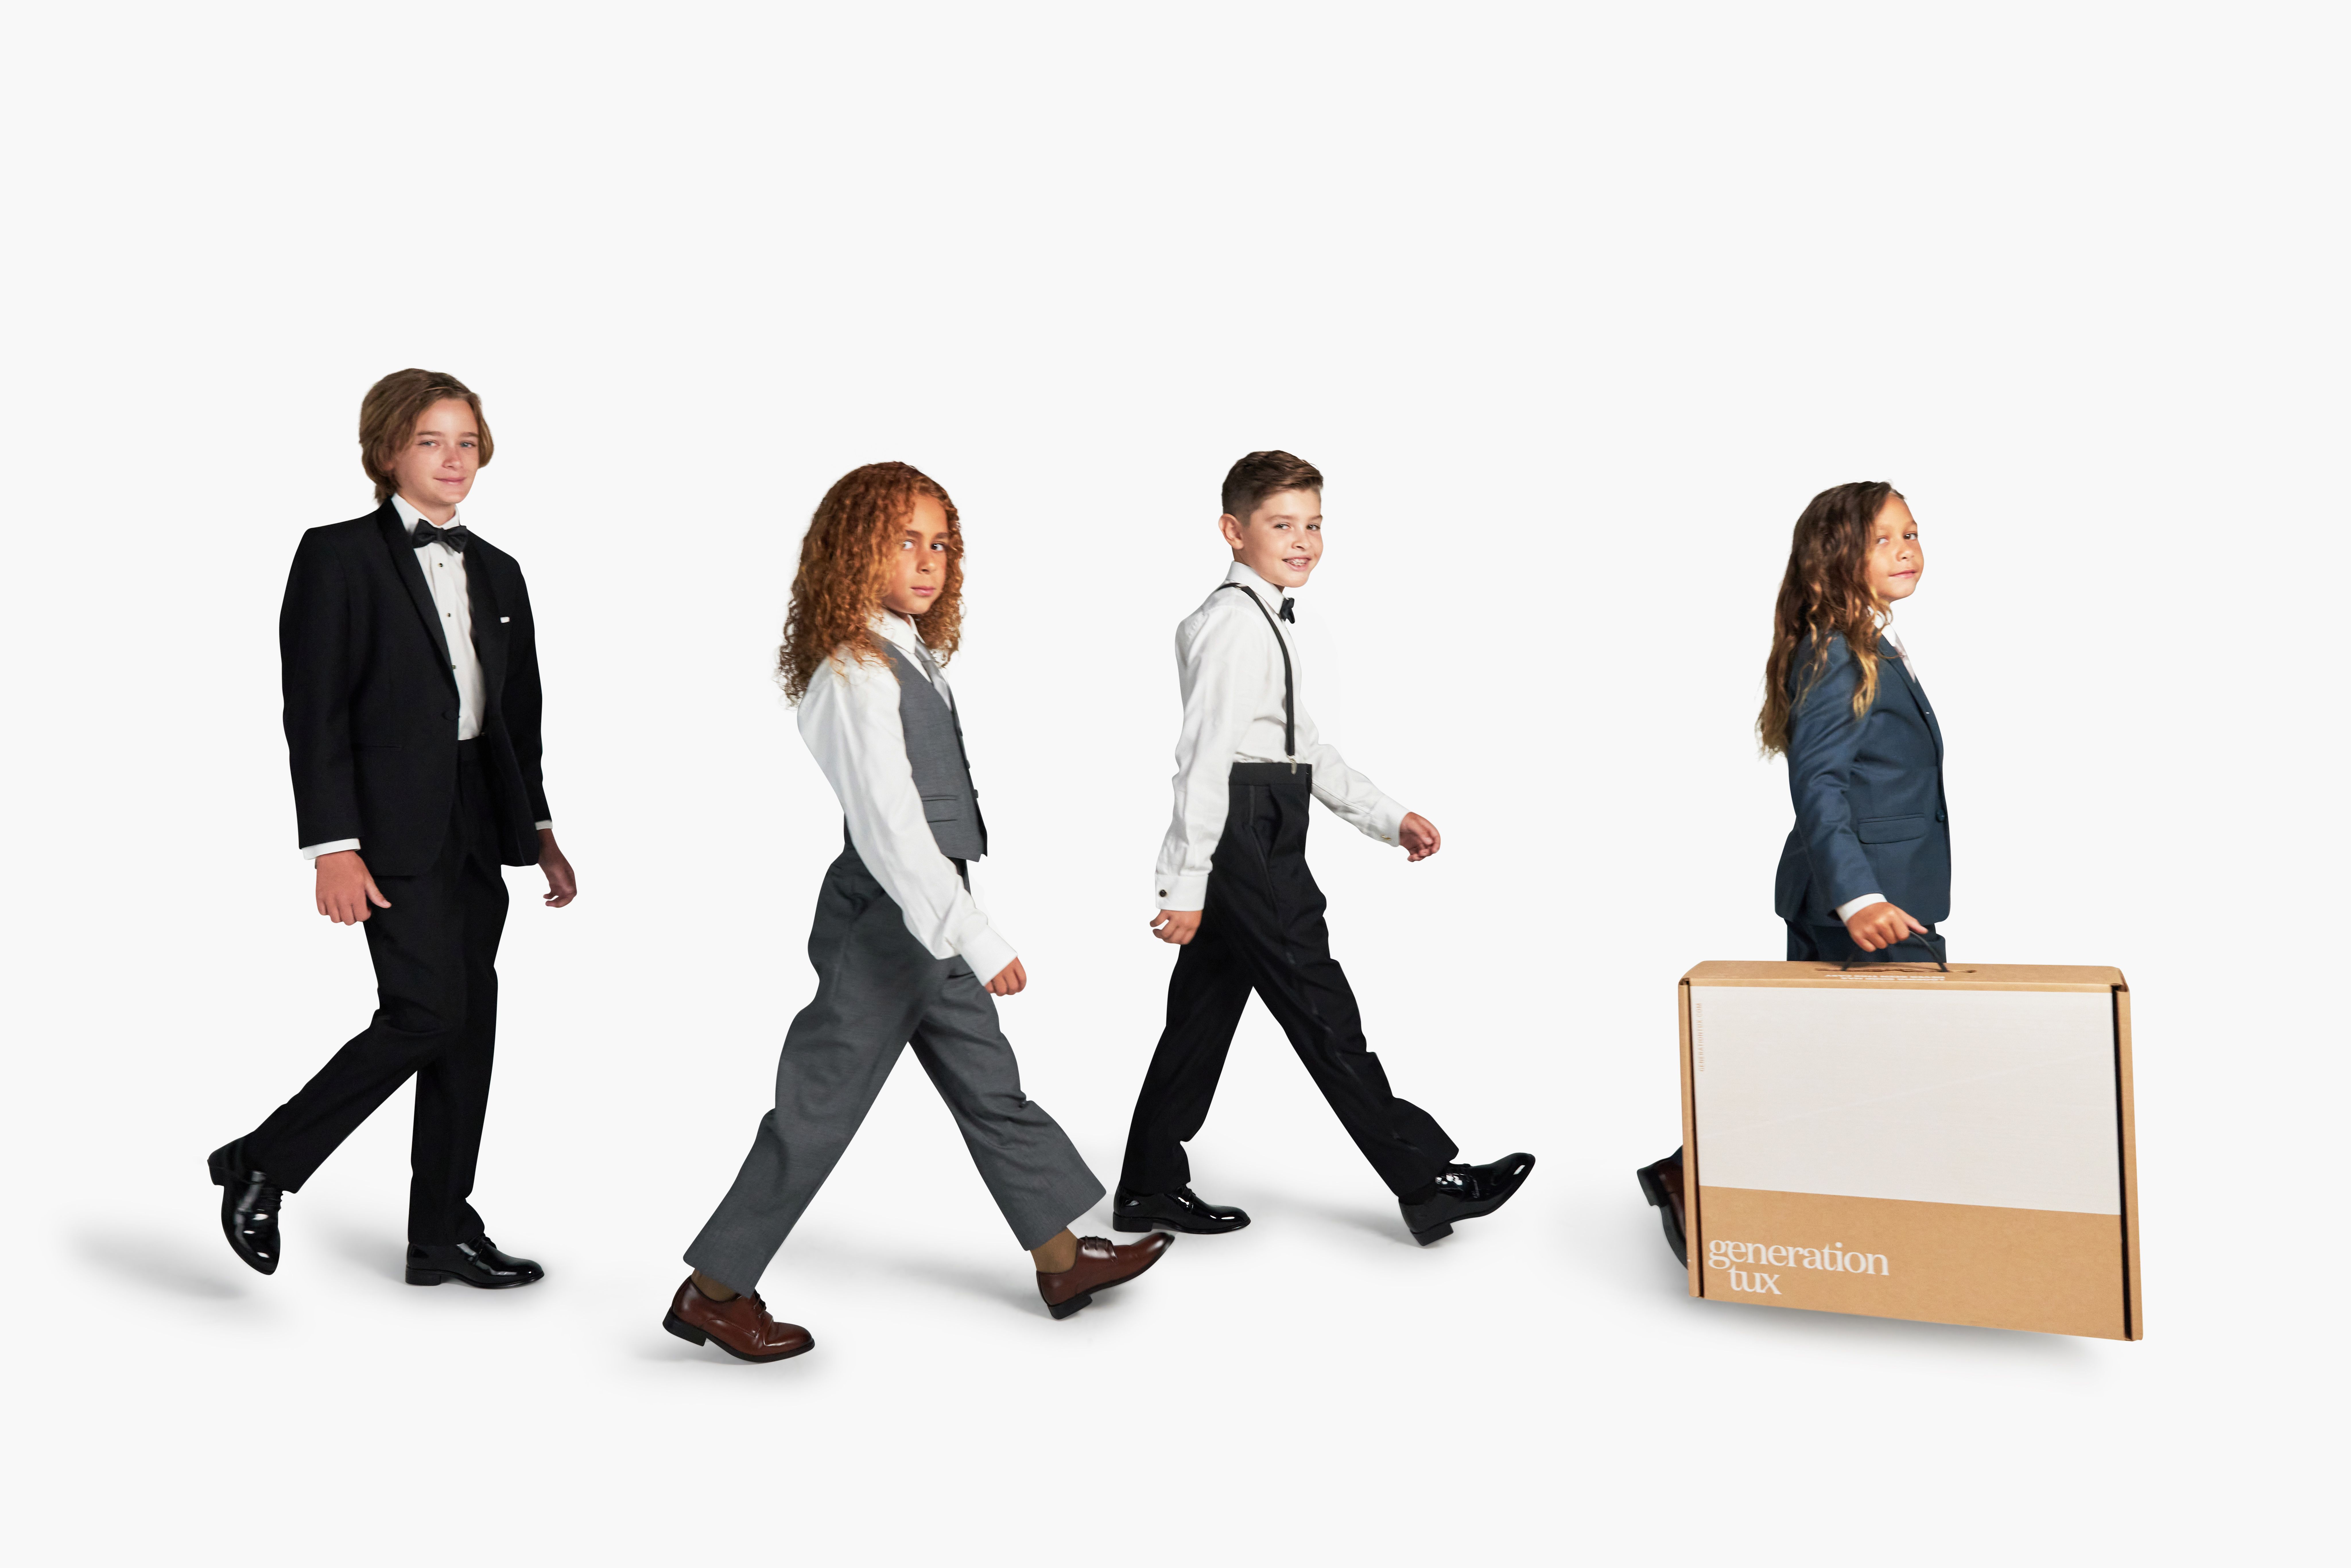 Suits and tuxedos for kids from Generation Tux